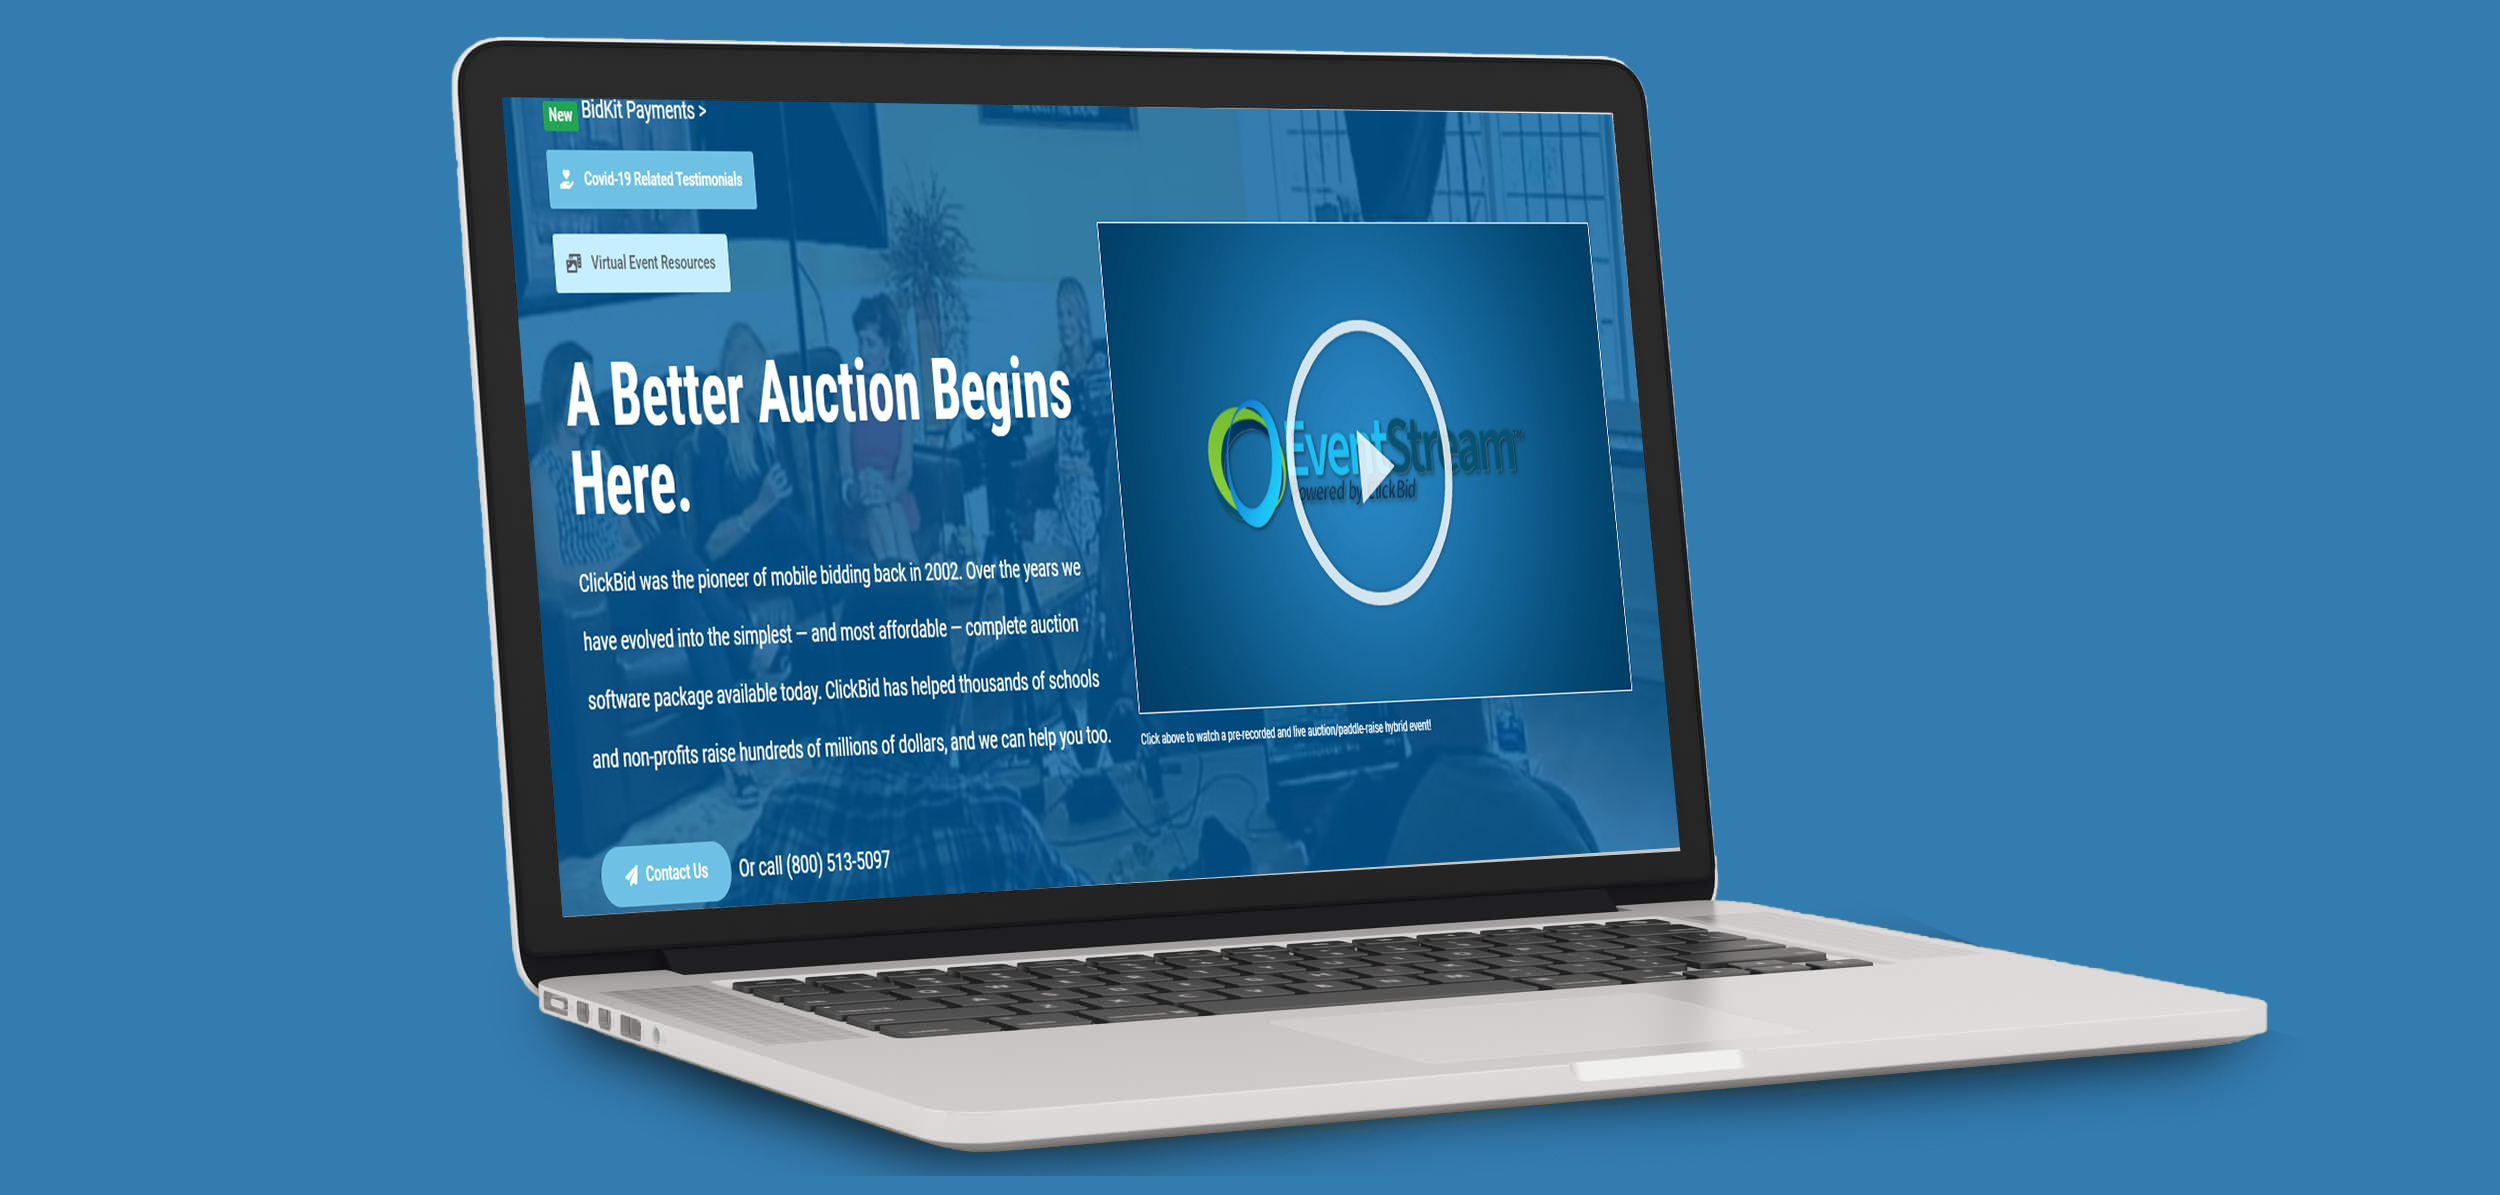 CharityAuctionsToday, Live Silent Auctions and Mobile Auctions